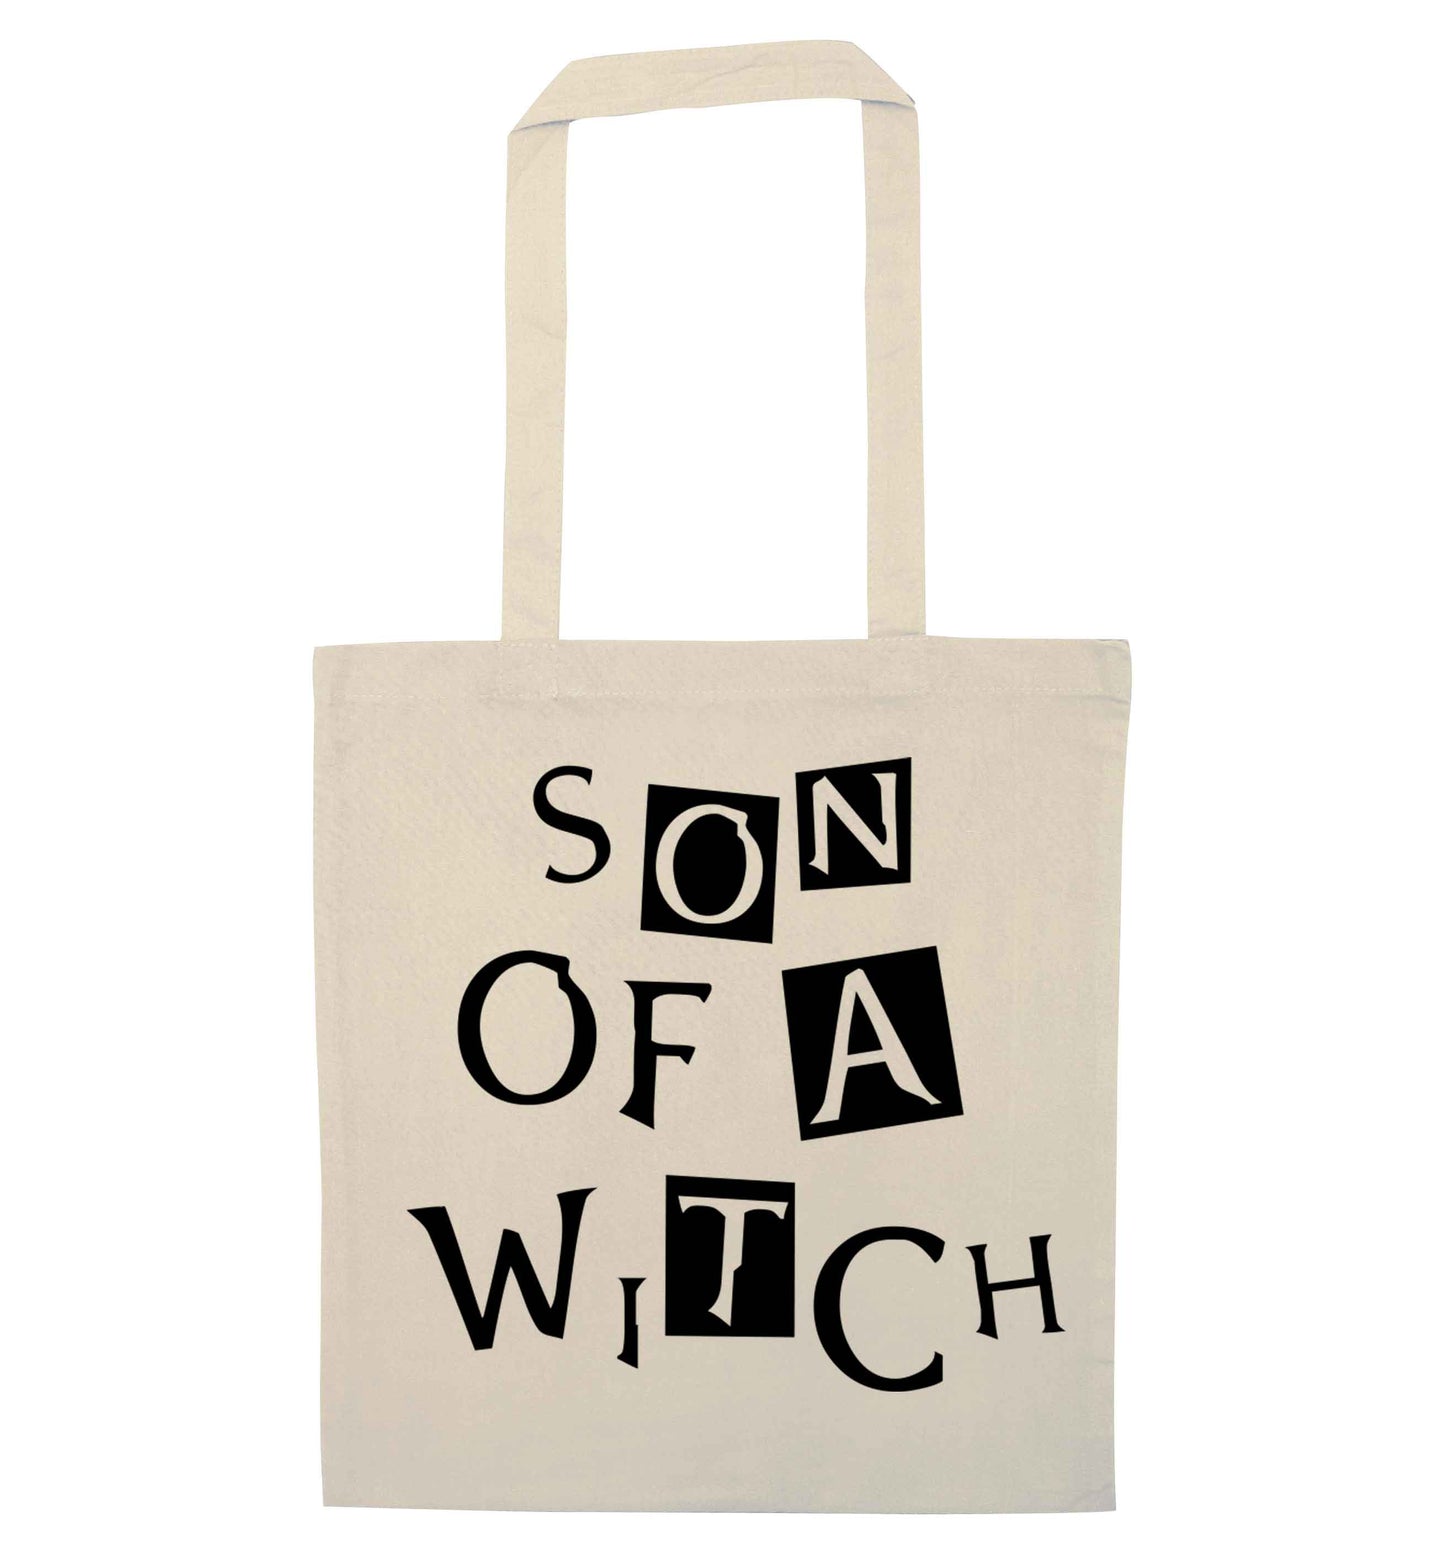 Son of a witch natural tote bag